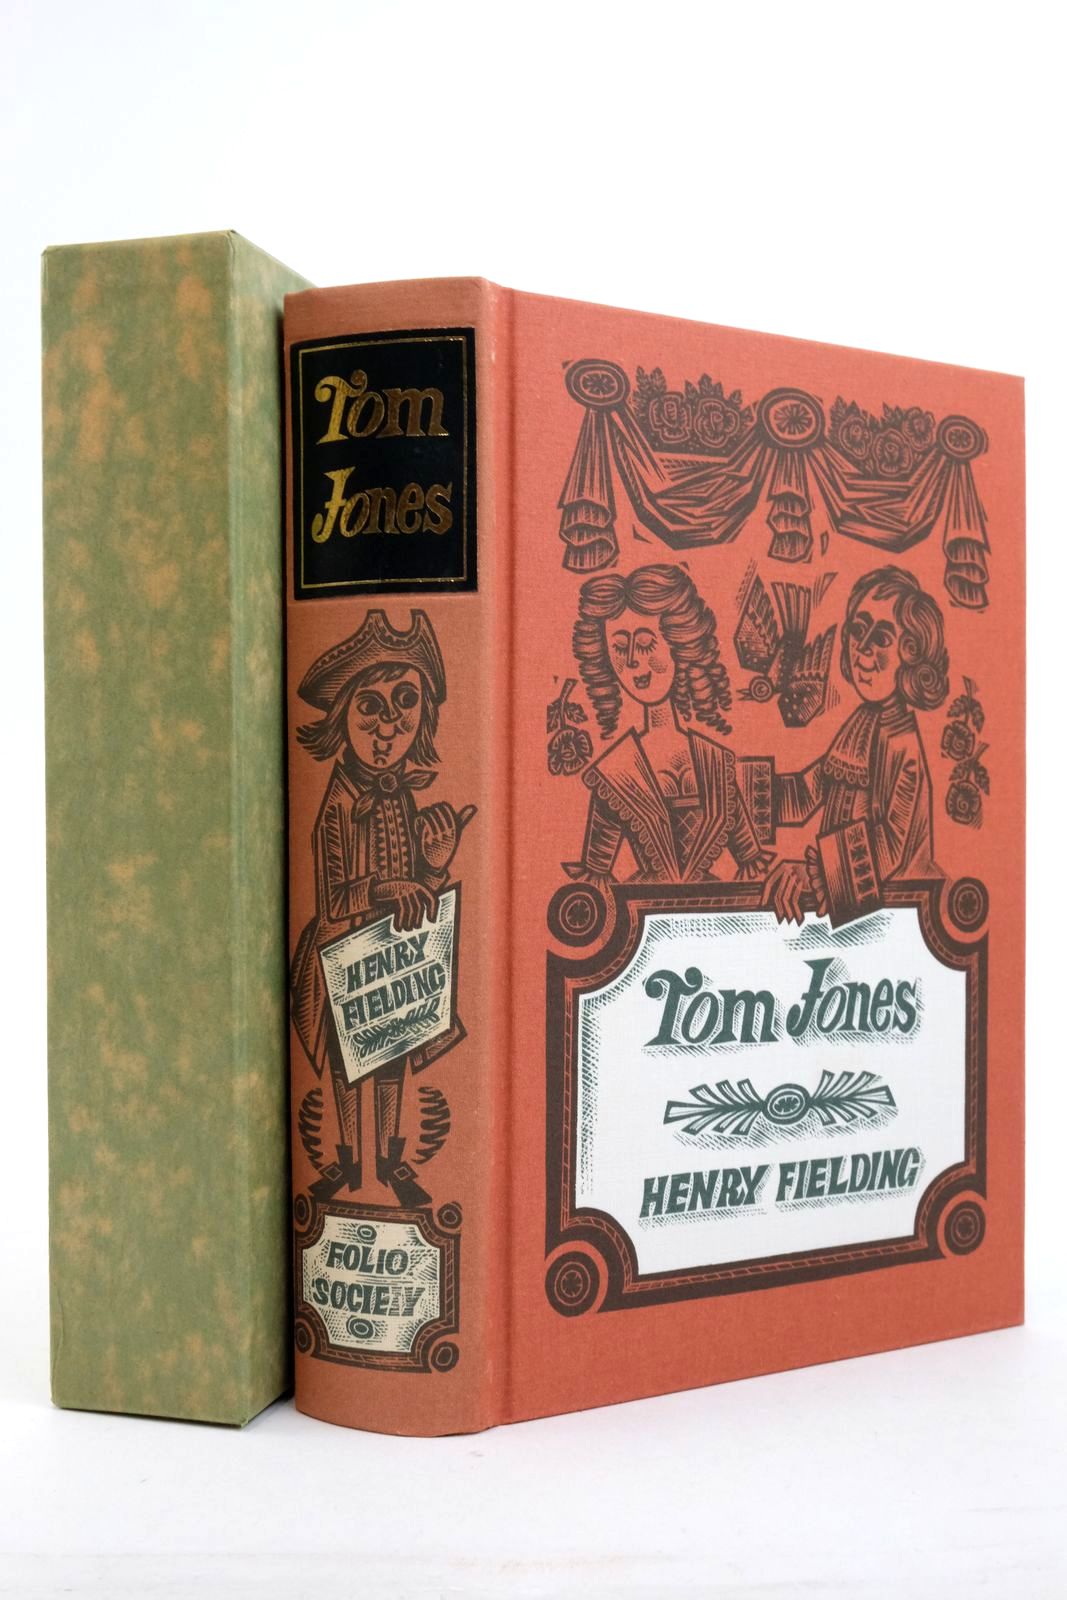 Photo of THE HISTORY OF TOM JONES written by Fielding, Henry illustrated by Harris, Derrick published by Folio Society (STOCK CODE: 2138268)  for sale by Stella & Rose's Books